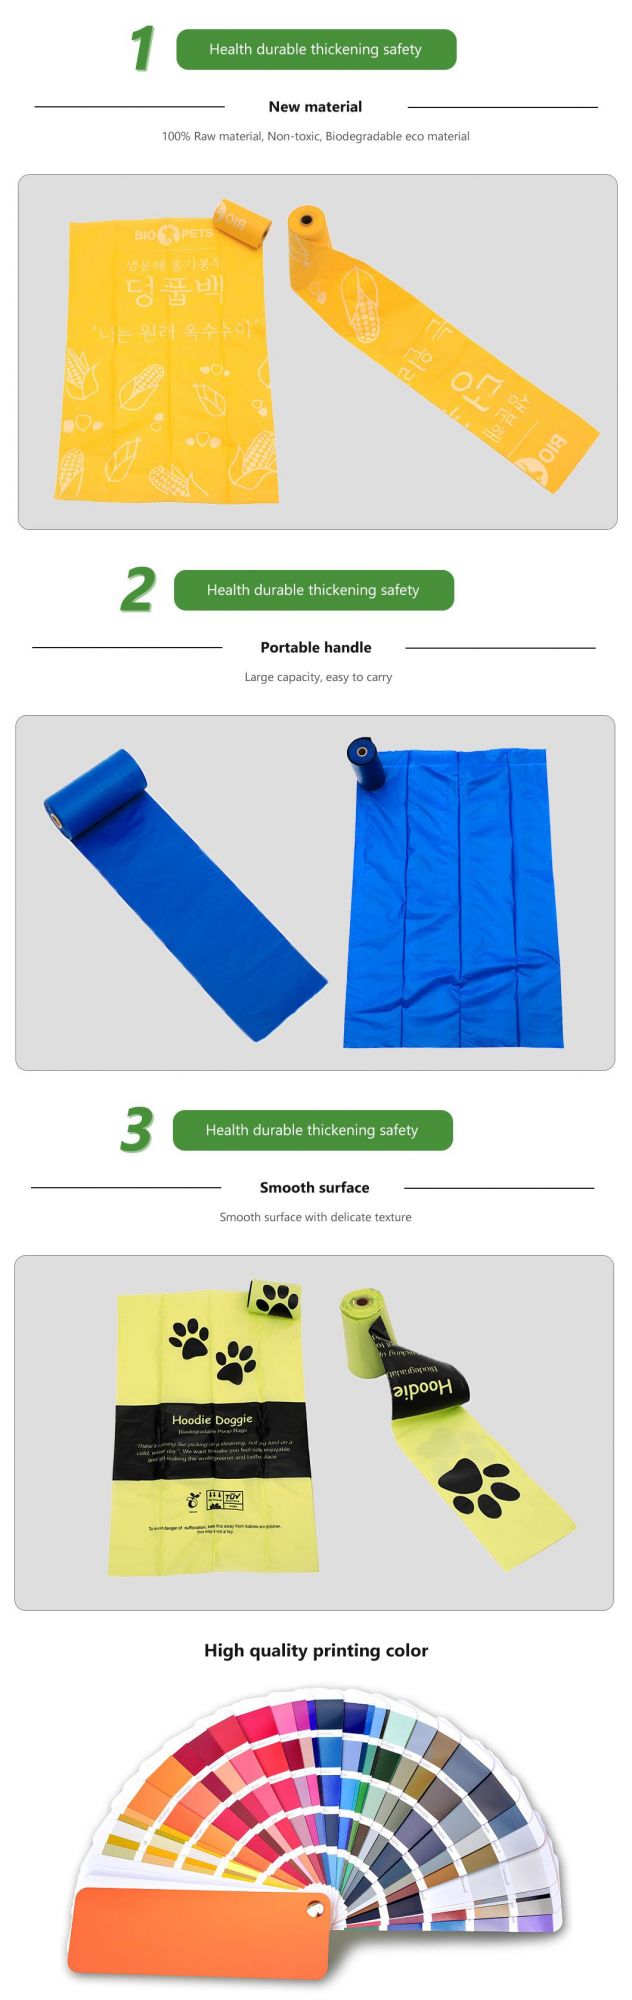 Biodegradable and Compostable Dog Pet Poop Bags Manufacturer with Customized Logo